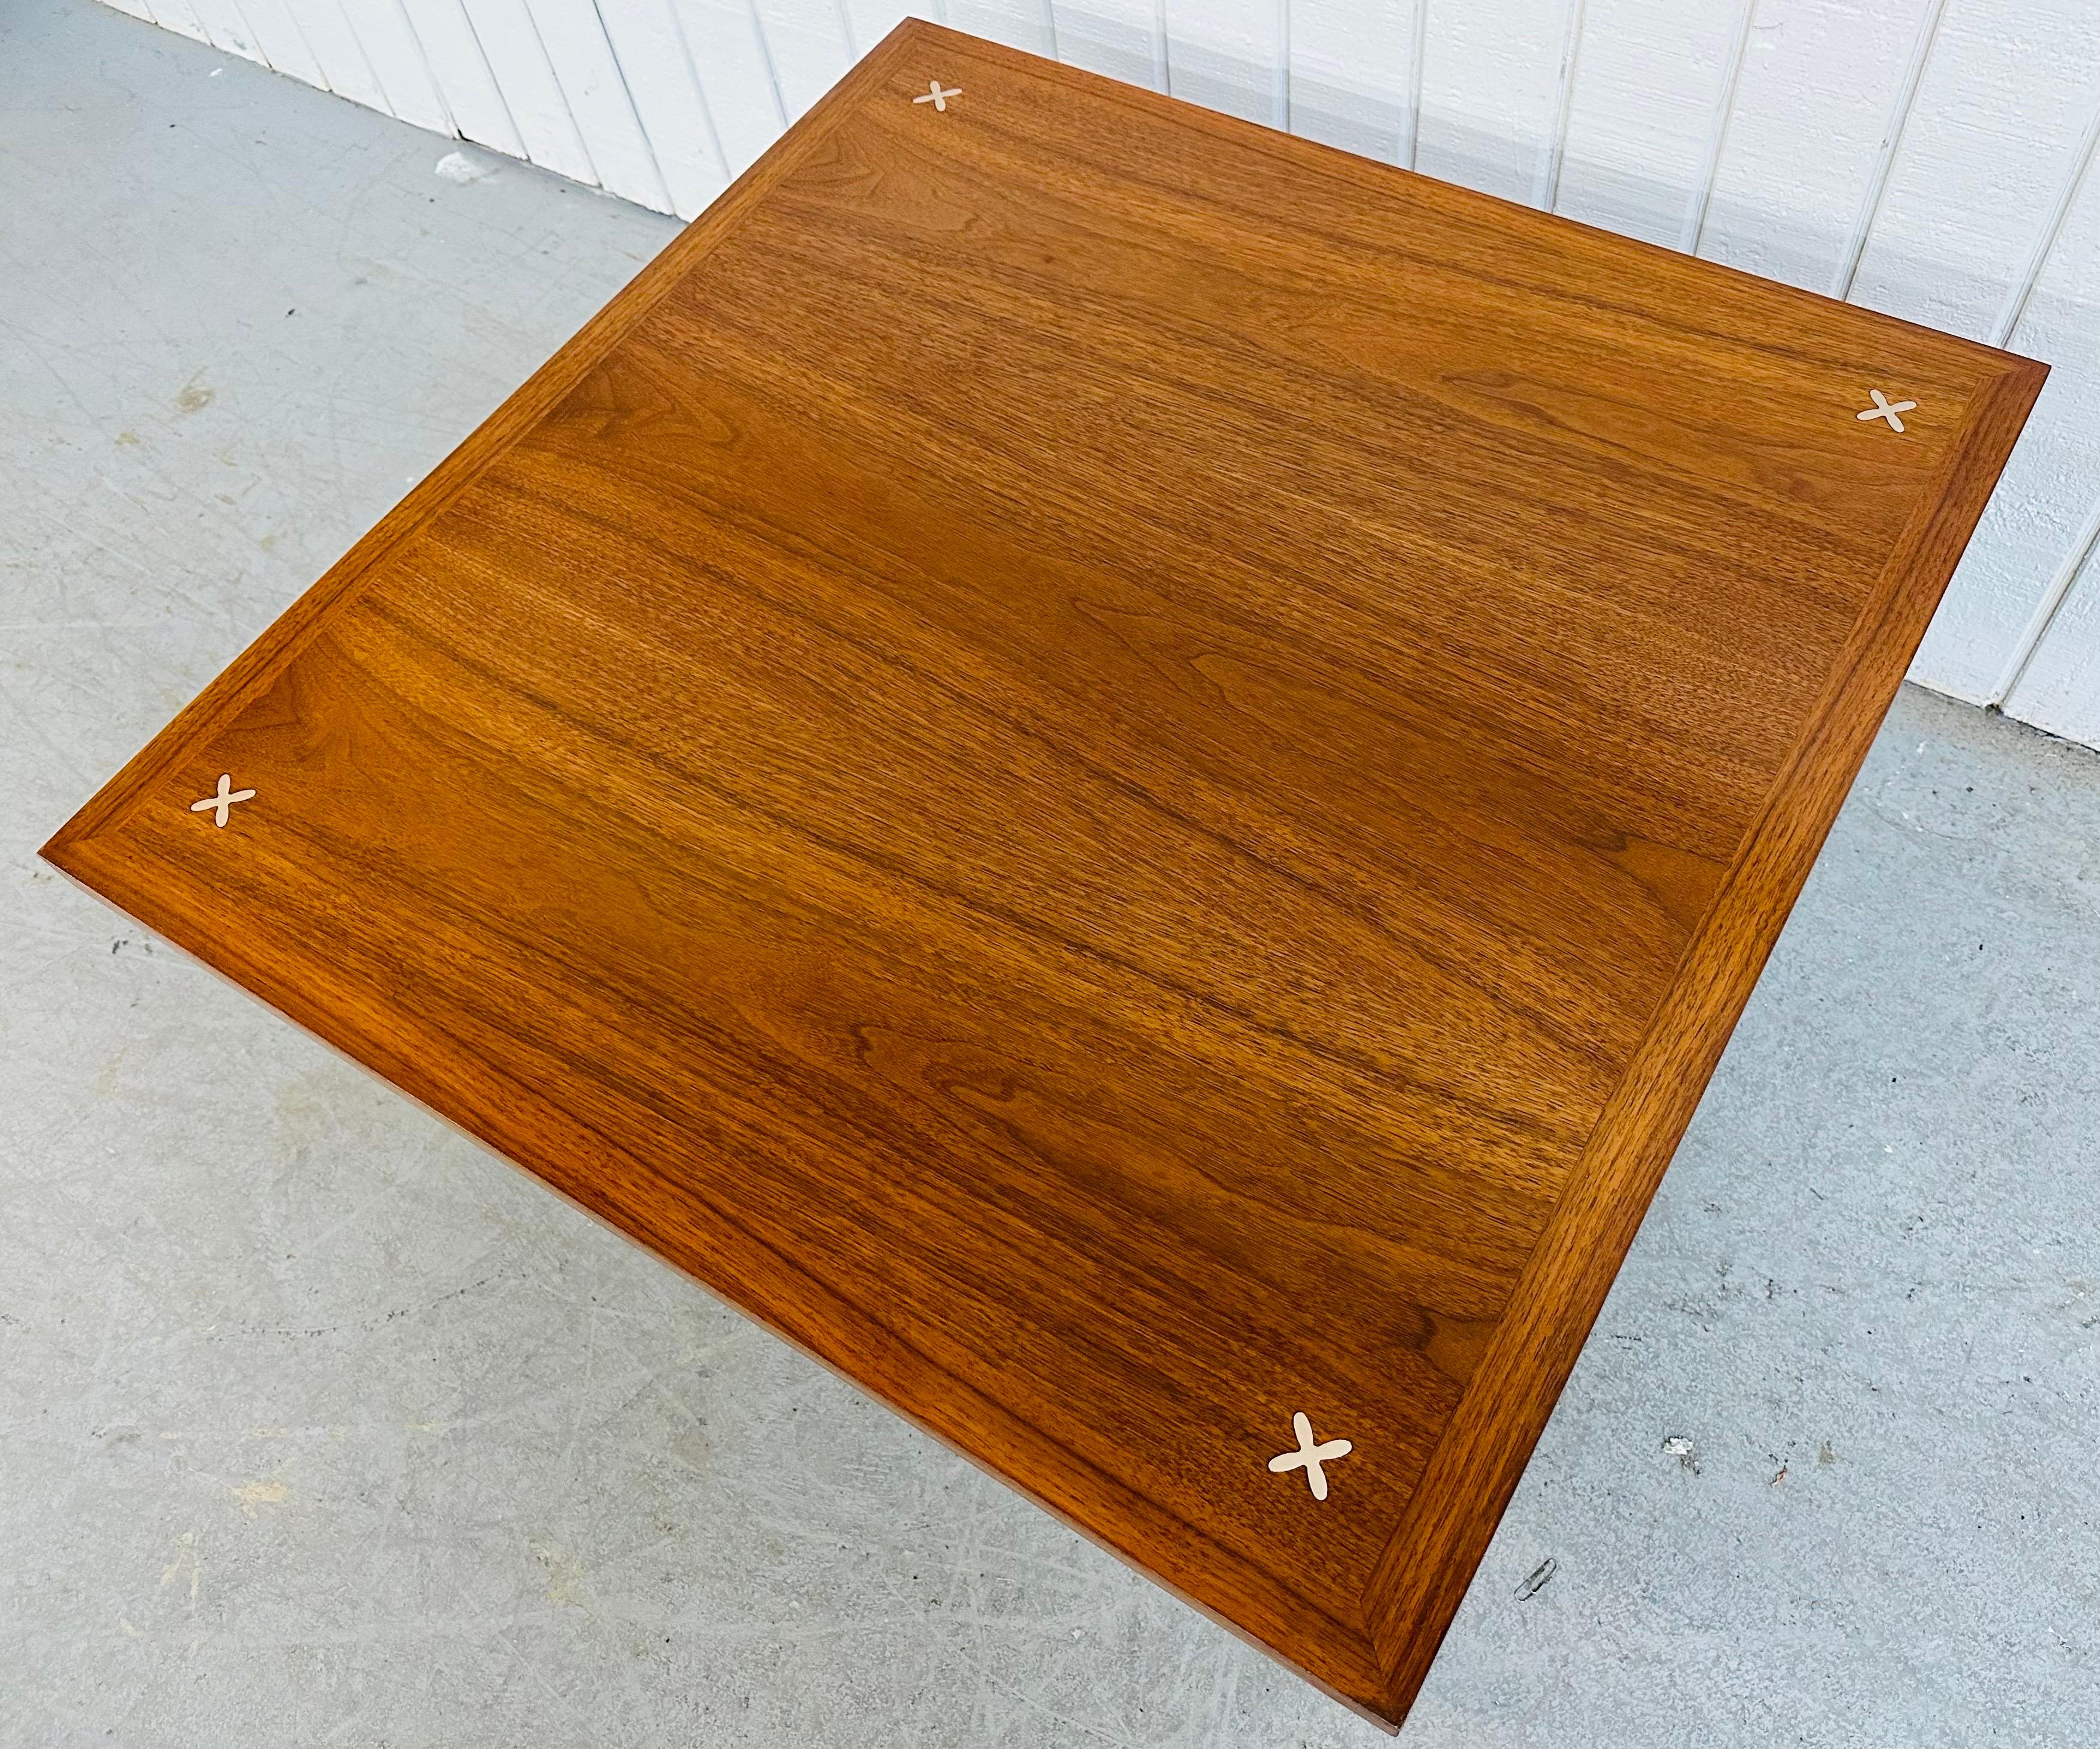 This listing is for a Mid-Century Modern American of Martinsville Walnut Coffee Table. Featuring a square top, inlaid crosses at each corner, modern screw on legs, and a beautiful walnut finish. This is an exceptional combination of quality and